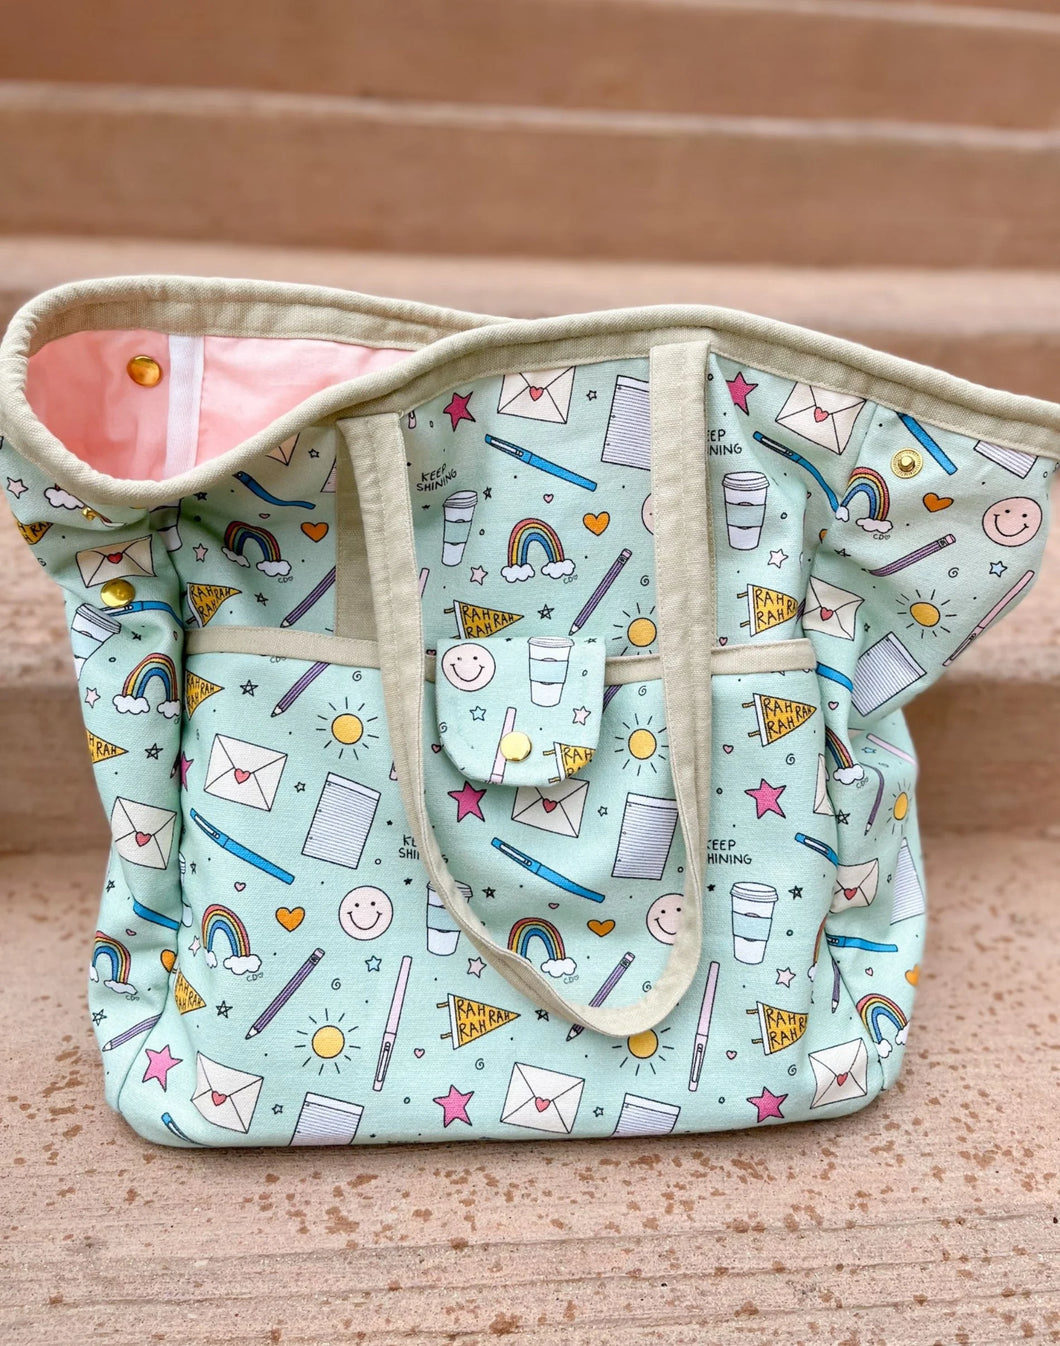 School Doodles Carry-All Tote